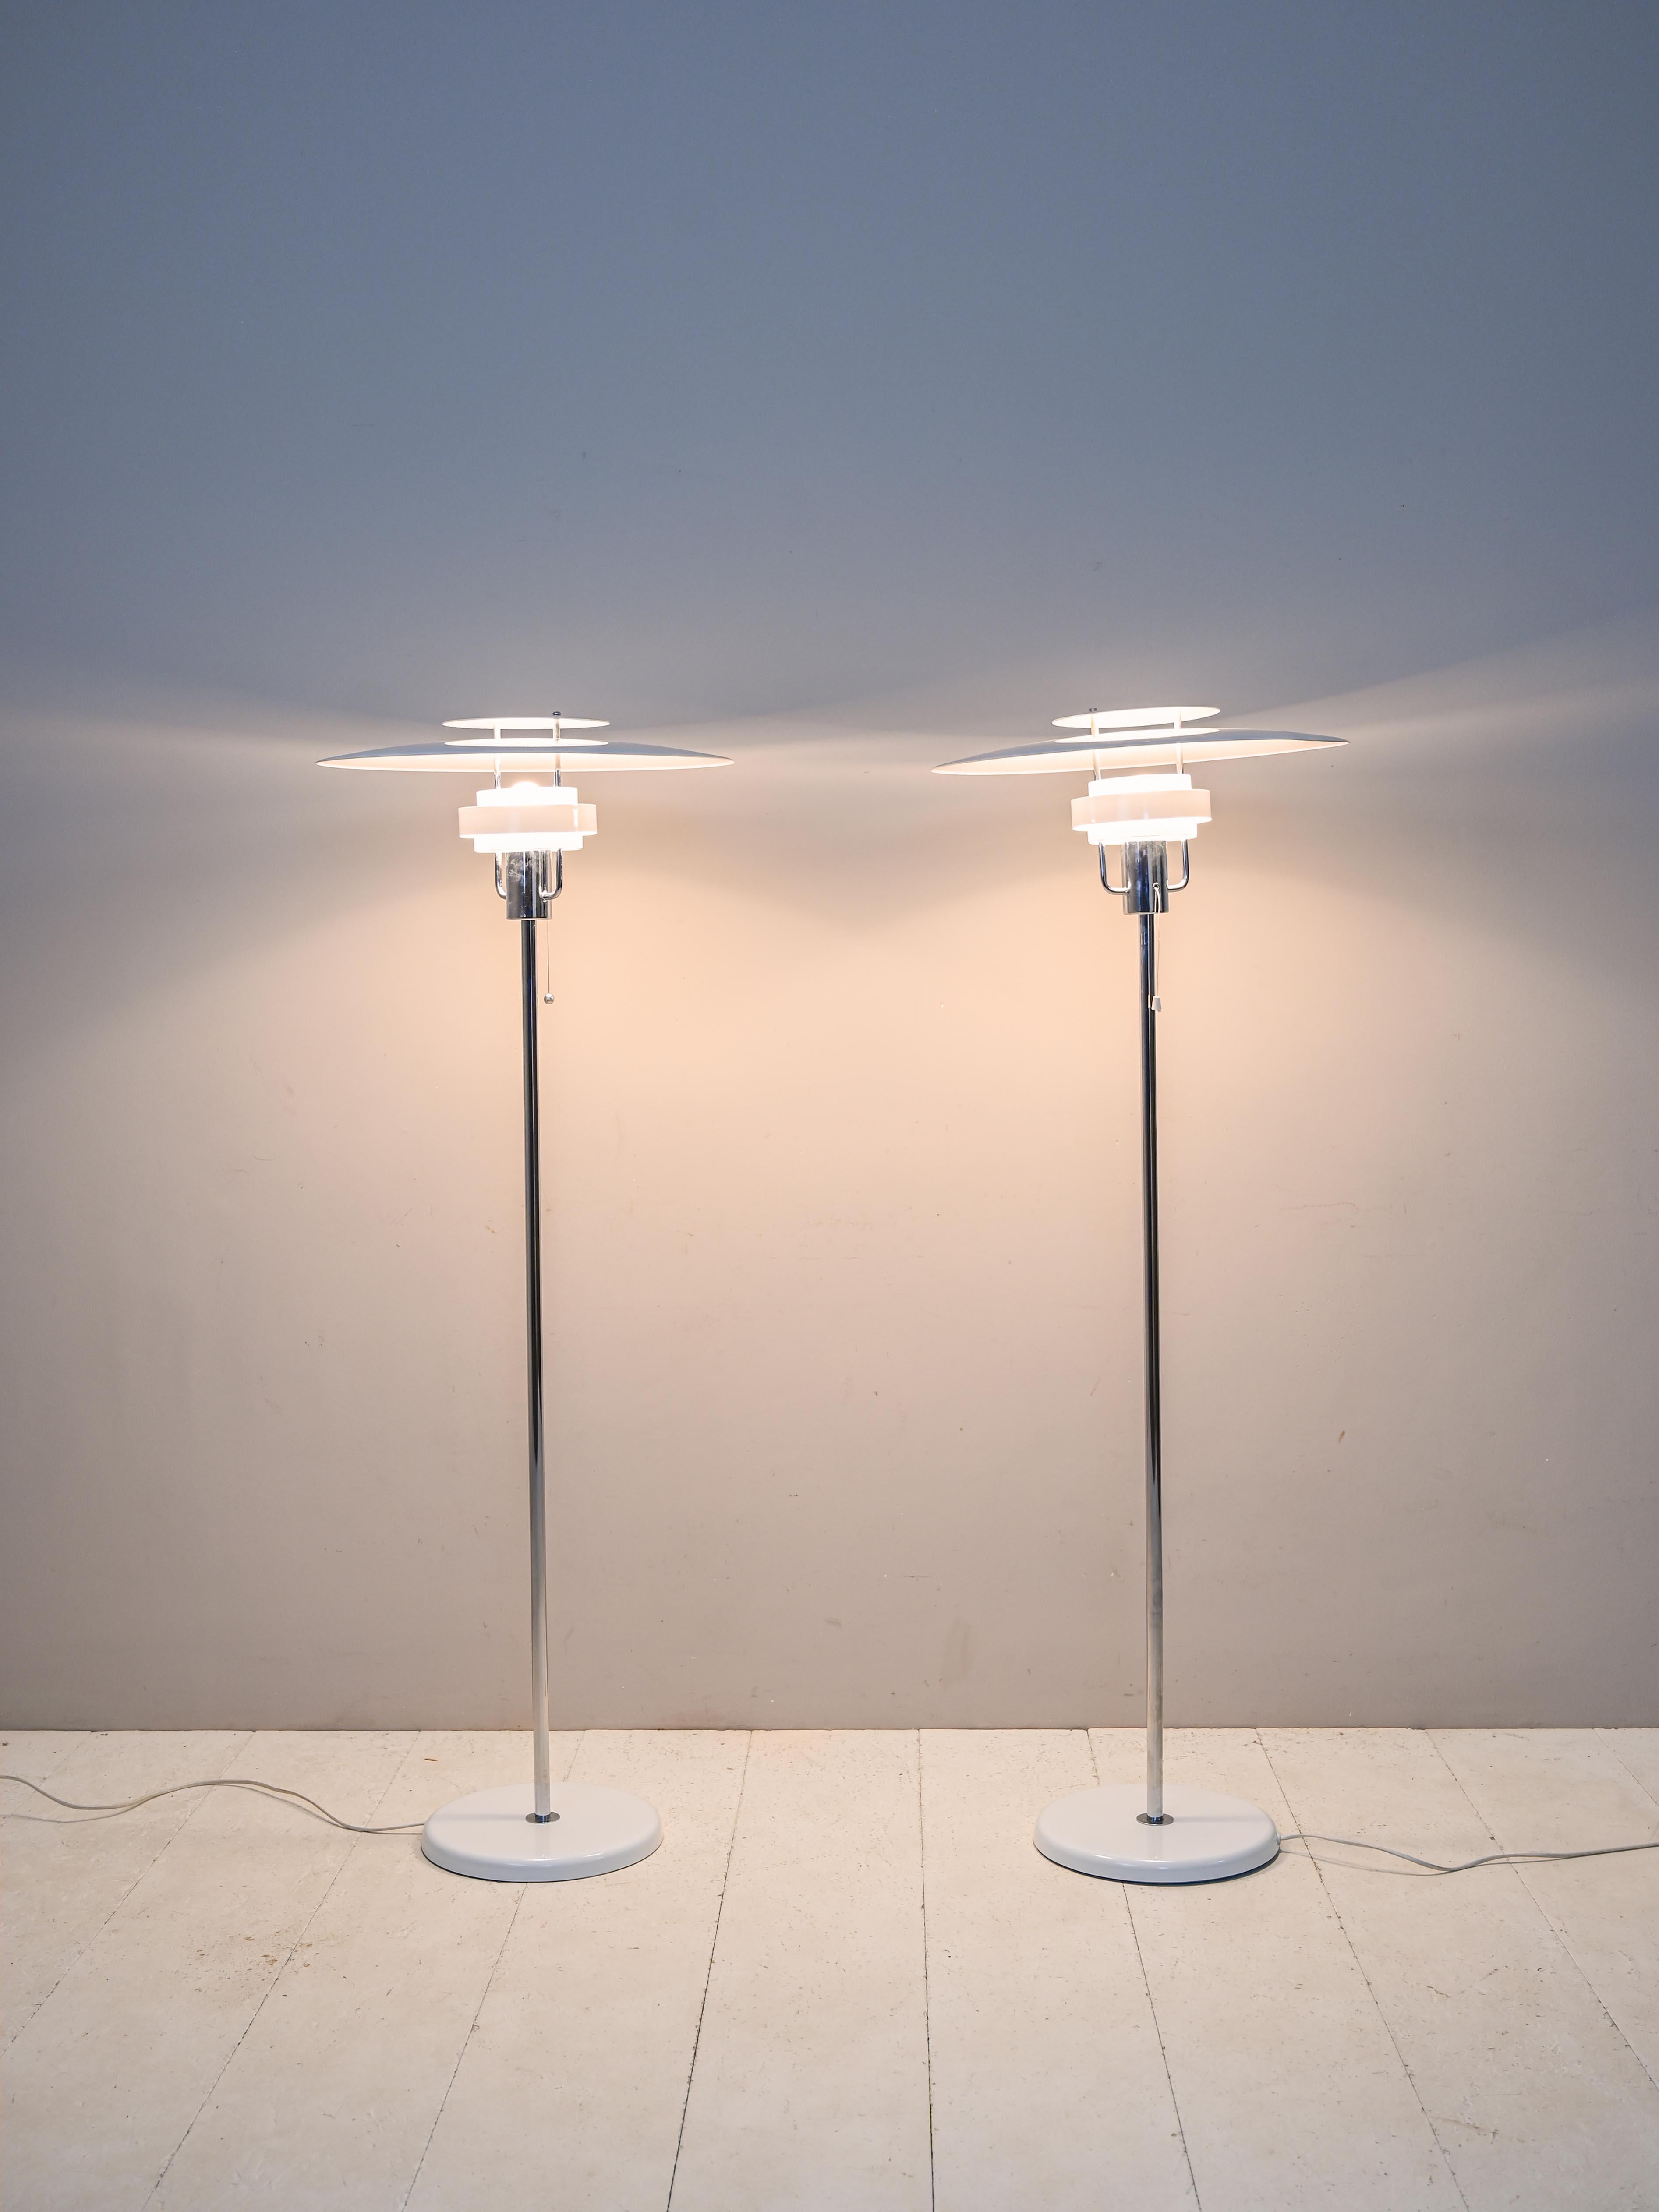 Original Scandinavian vintage 1970s lamps.

Consisting of the metal base and the shade formed by thin white enameled metal rings through which the light filters and diffuses softly.
The label attesting to their originality is present.

Good